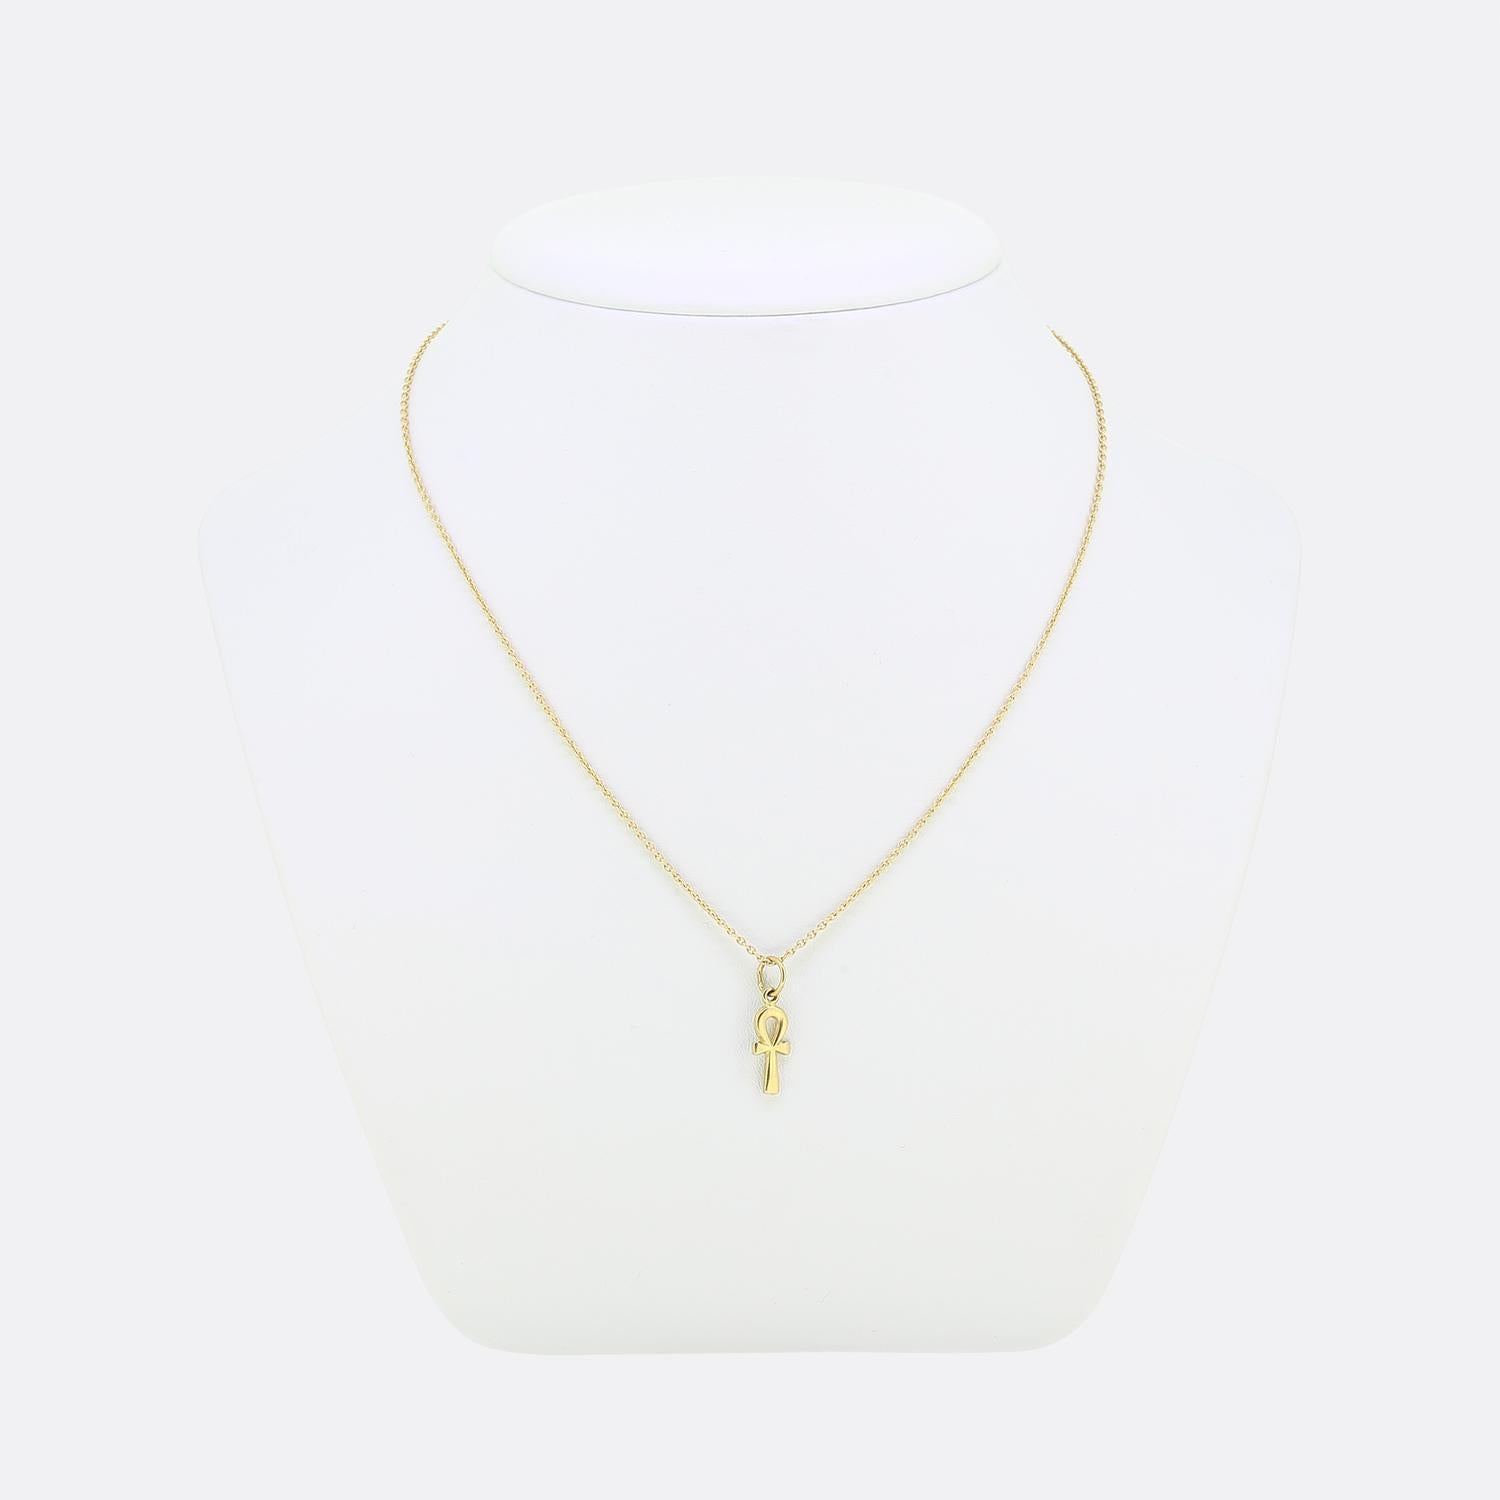 Here we have a charming pendant necklace crafted from 18ct yellow gold into the shape of the ankh cross. The ankh is an ancient Egyptian symbol which represents the many aspects of life, including physical life, eternal life, immortality, death and